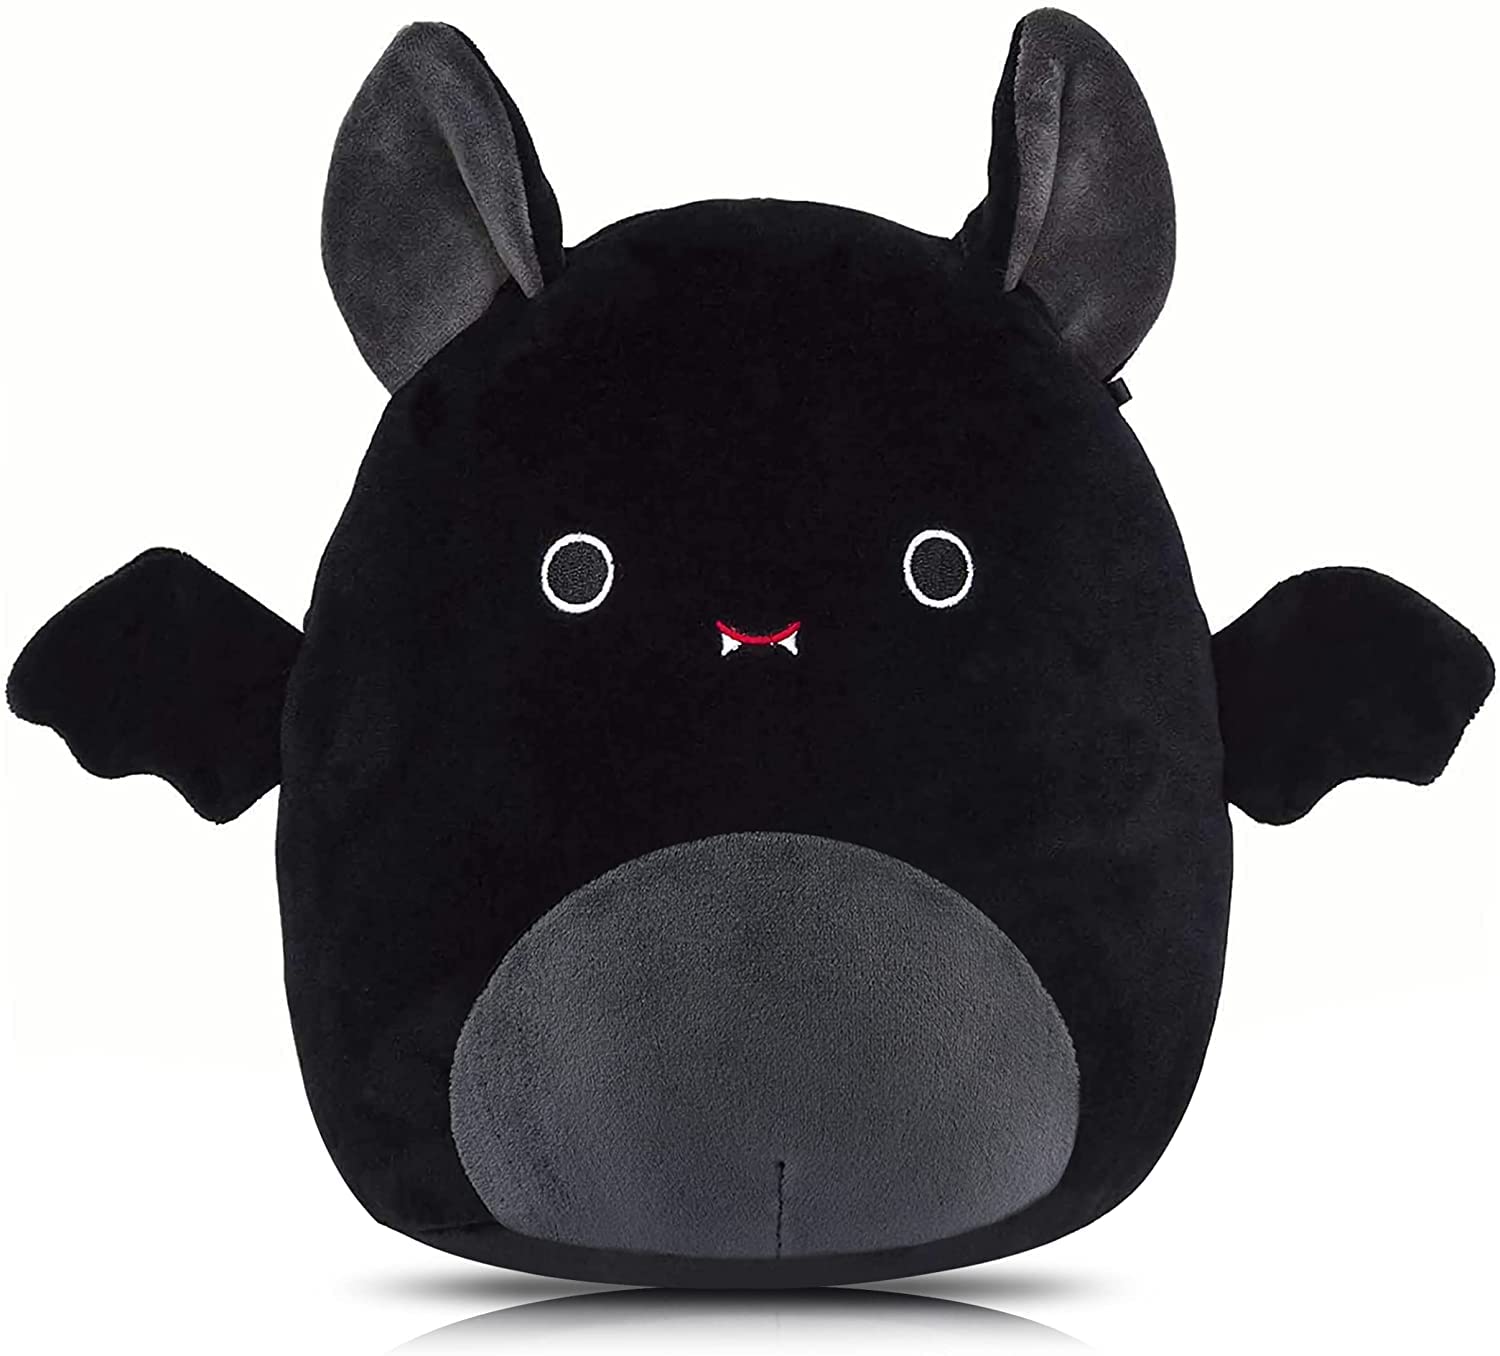 Bat Plush, 20cm Black Bat Plushies Kawaii Stuffed Animal, Cute Plushies Halloween , Suitable for All Ages, An Indispensable Cute Plush Toy for The Family (Black-8inch)